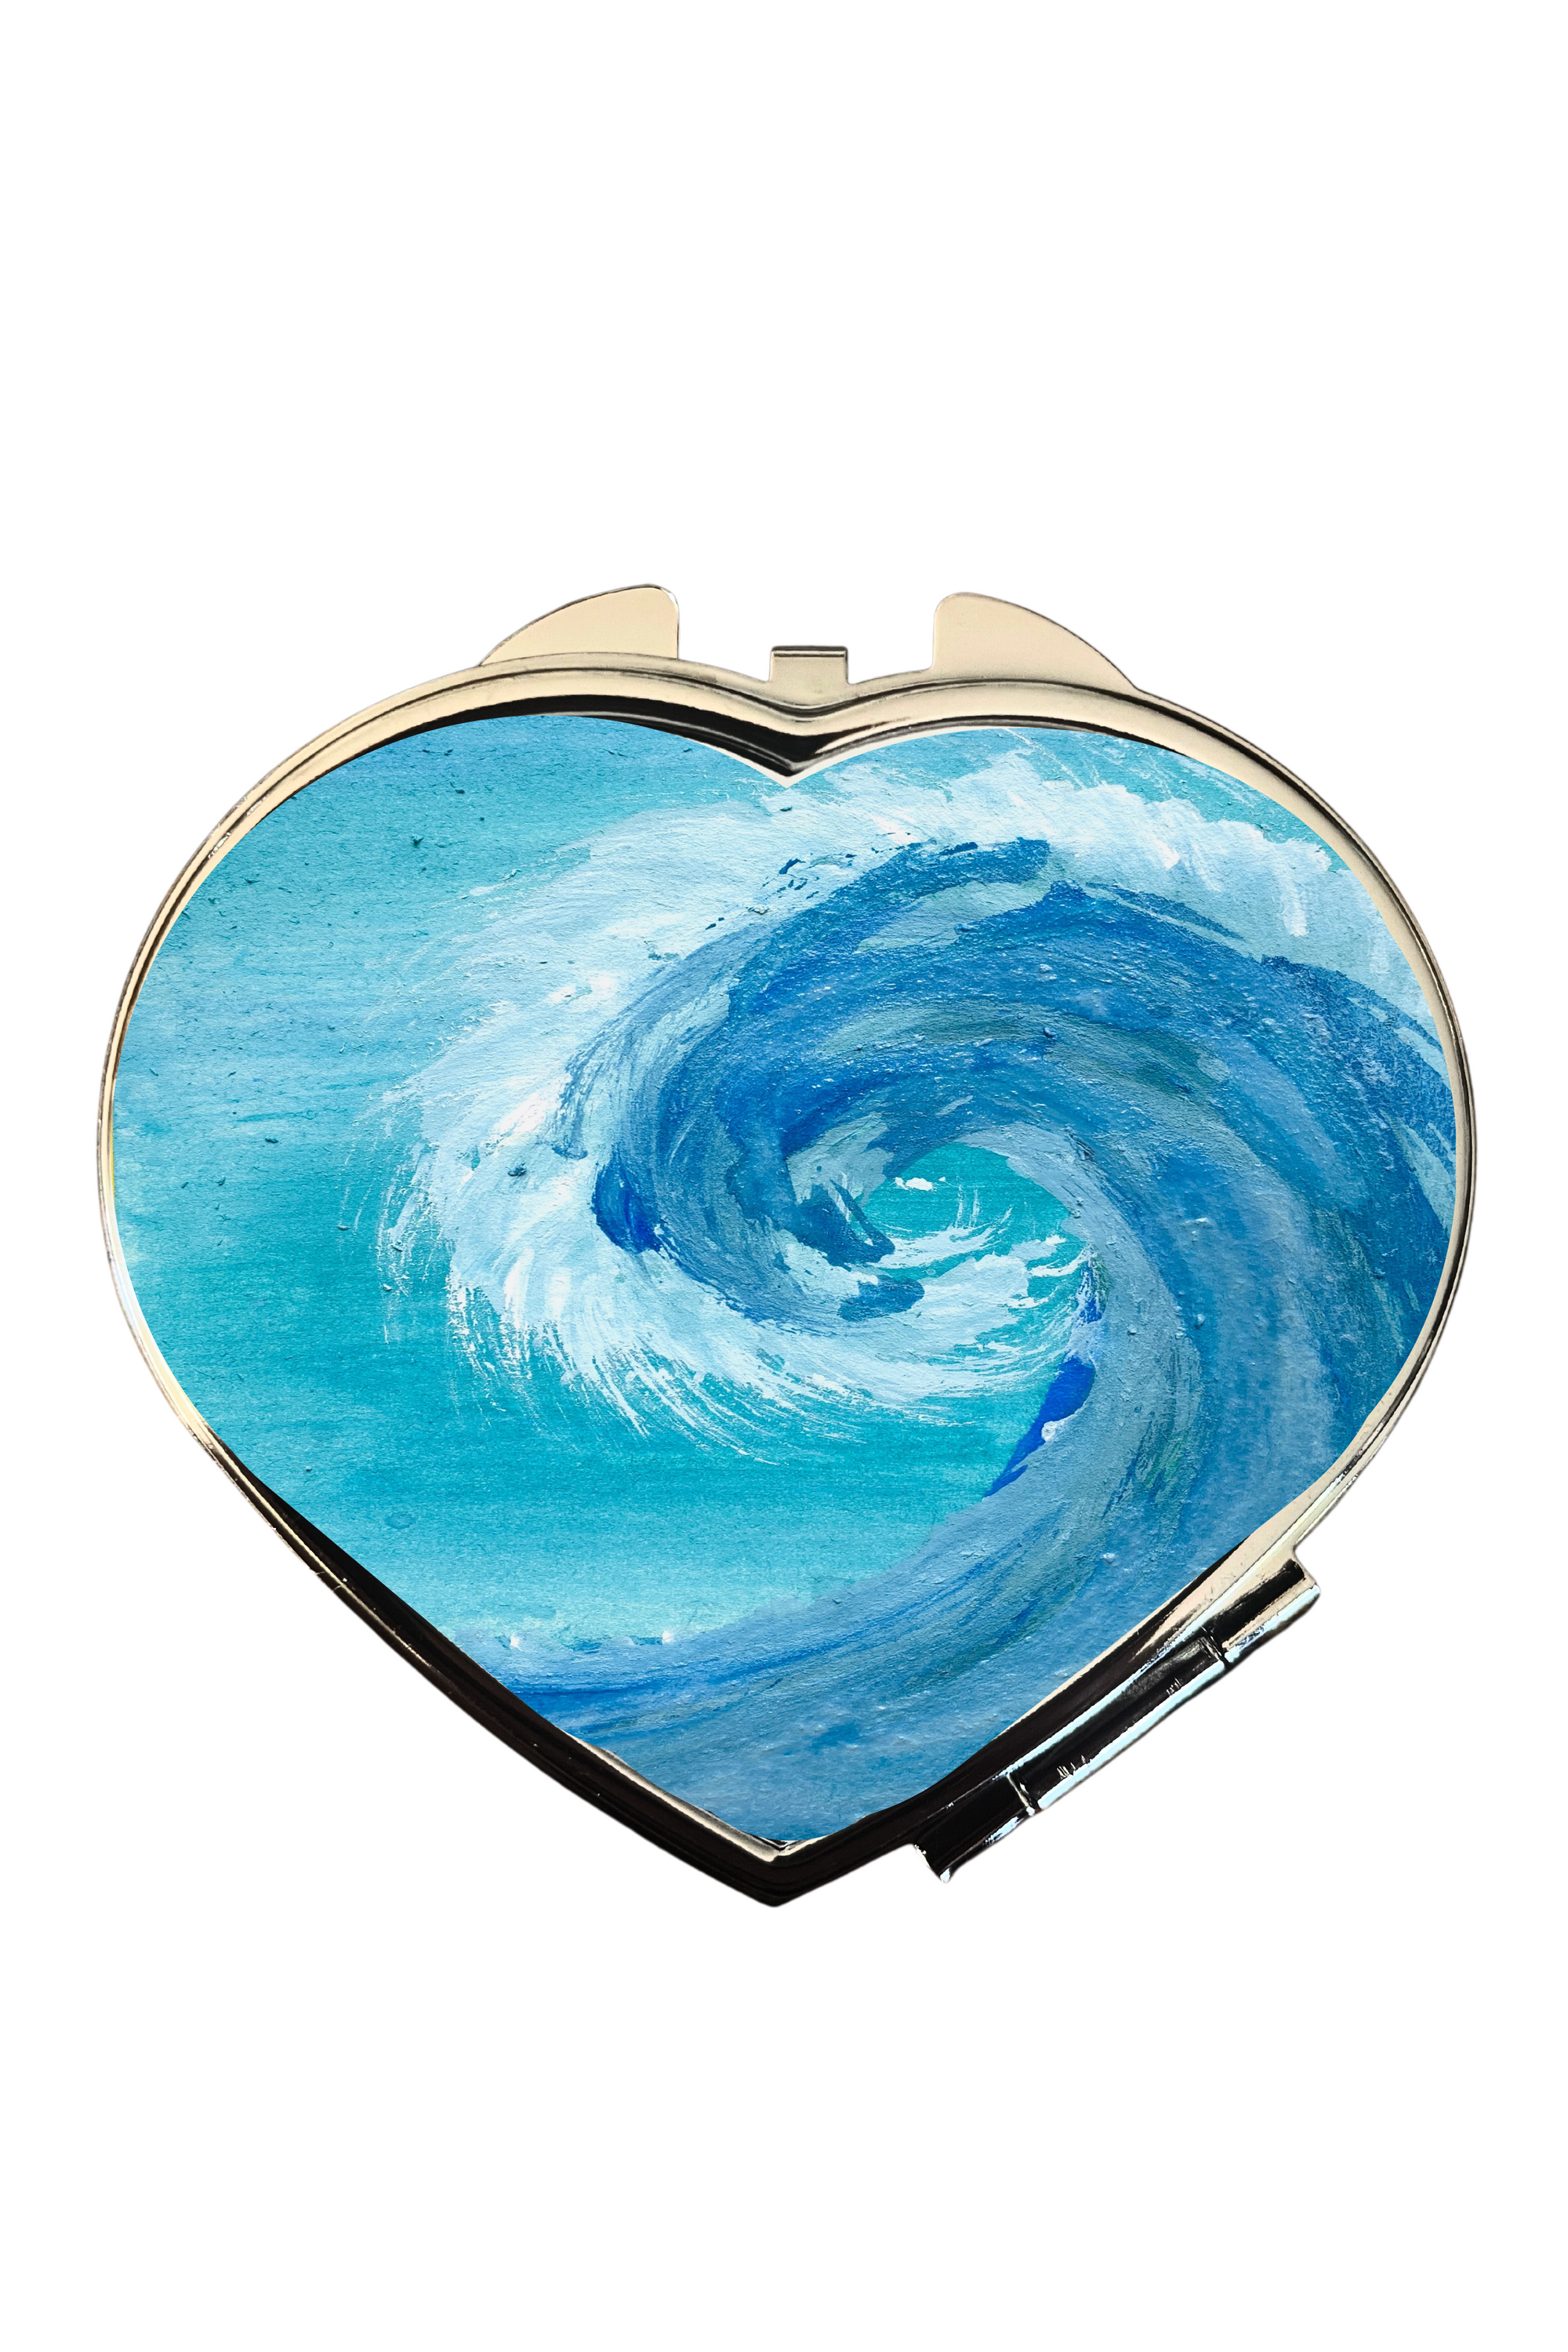 ***Ride the wave compact mirror